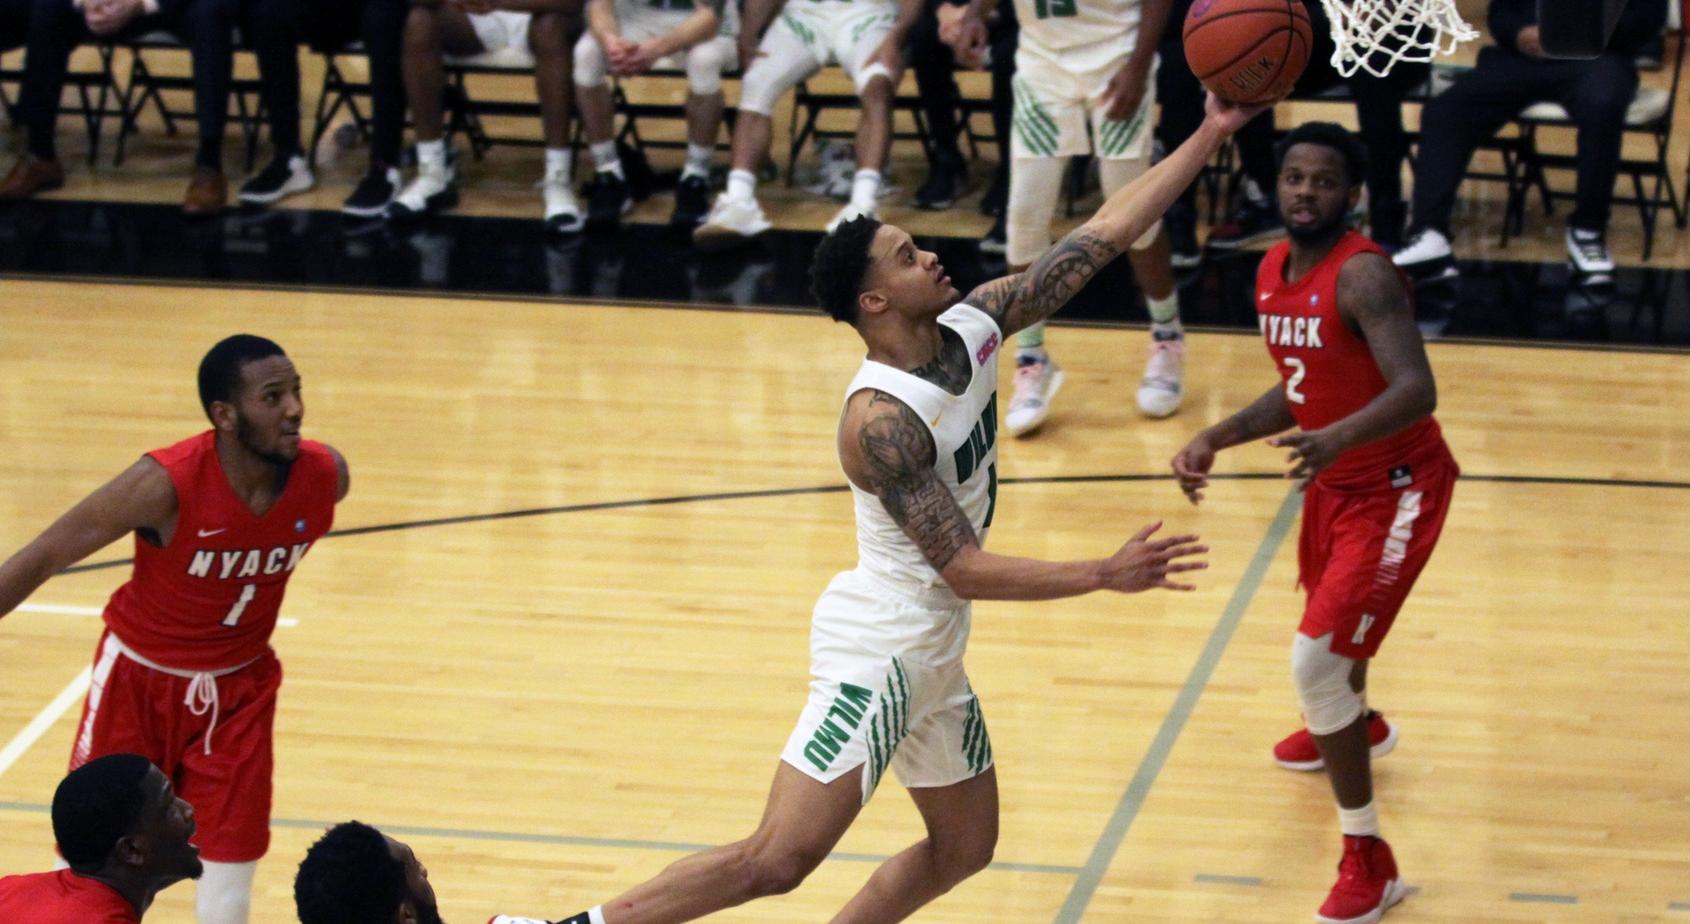 Copyright 2019; Wilmington University. All rights reserved. Photo of Jermaine Head who contributed a double-double with 19 points and 10 rebounds against Nyack. Photo by Dan Lauletta. January 5, 2019 vs. Nyack.